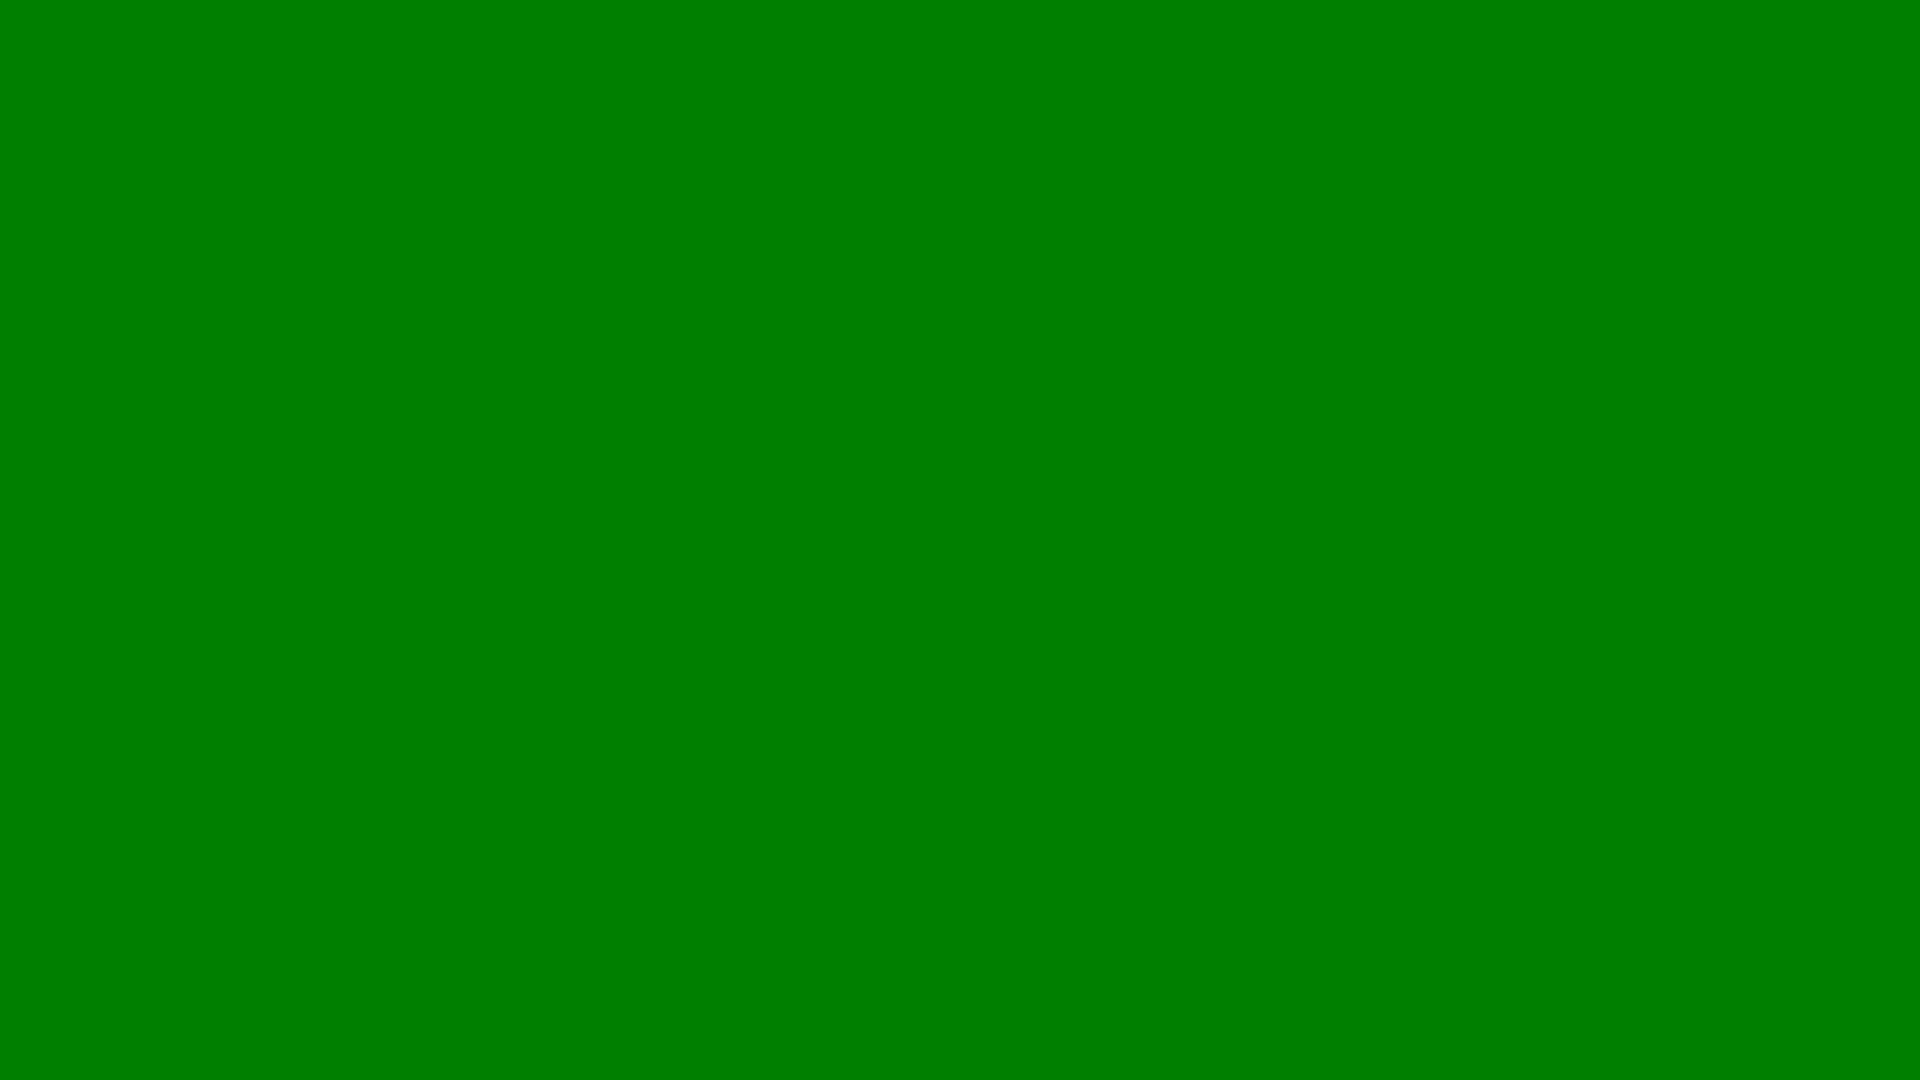 a green background with a white arrow